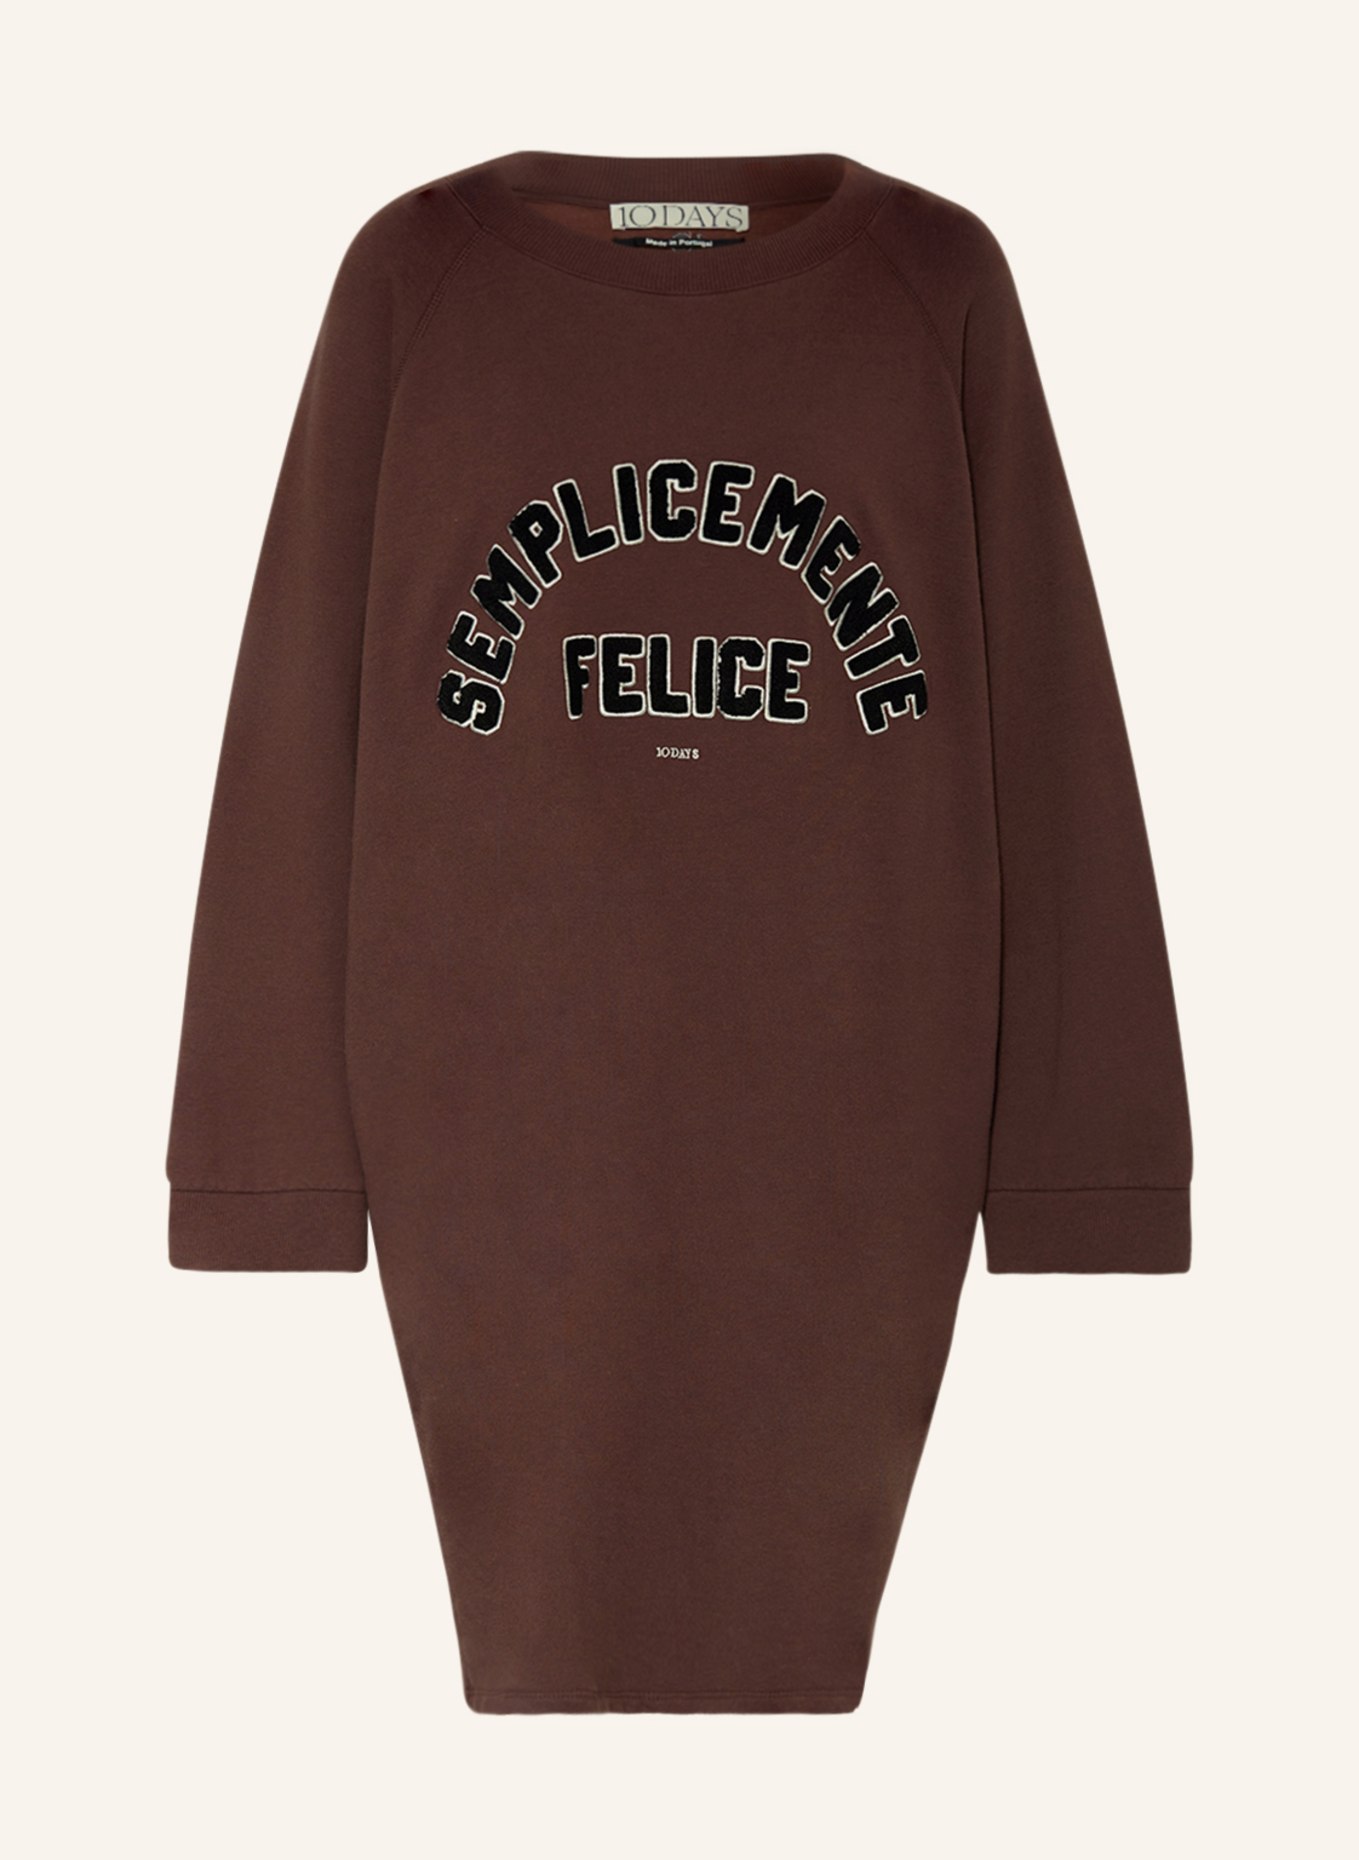 10DAYS Sweater dress, Color: BROWN (Image 1)